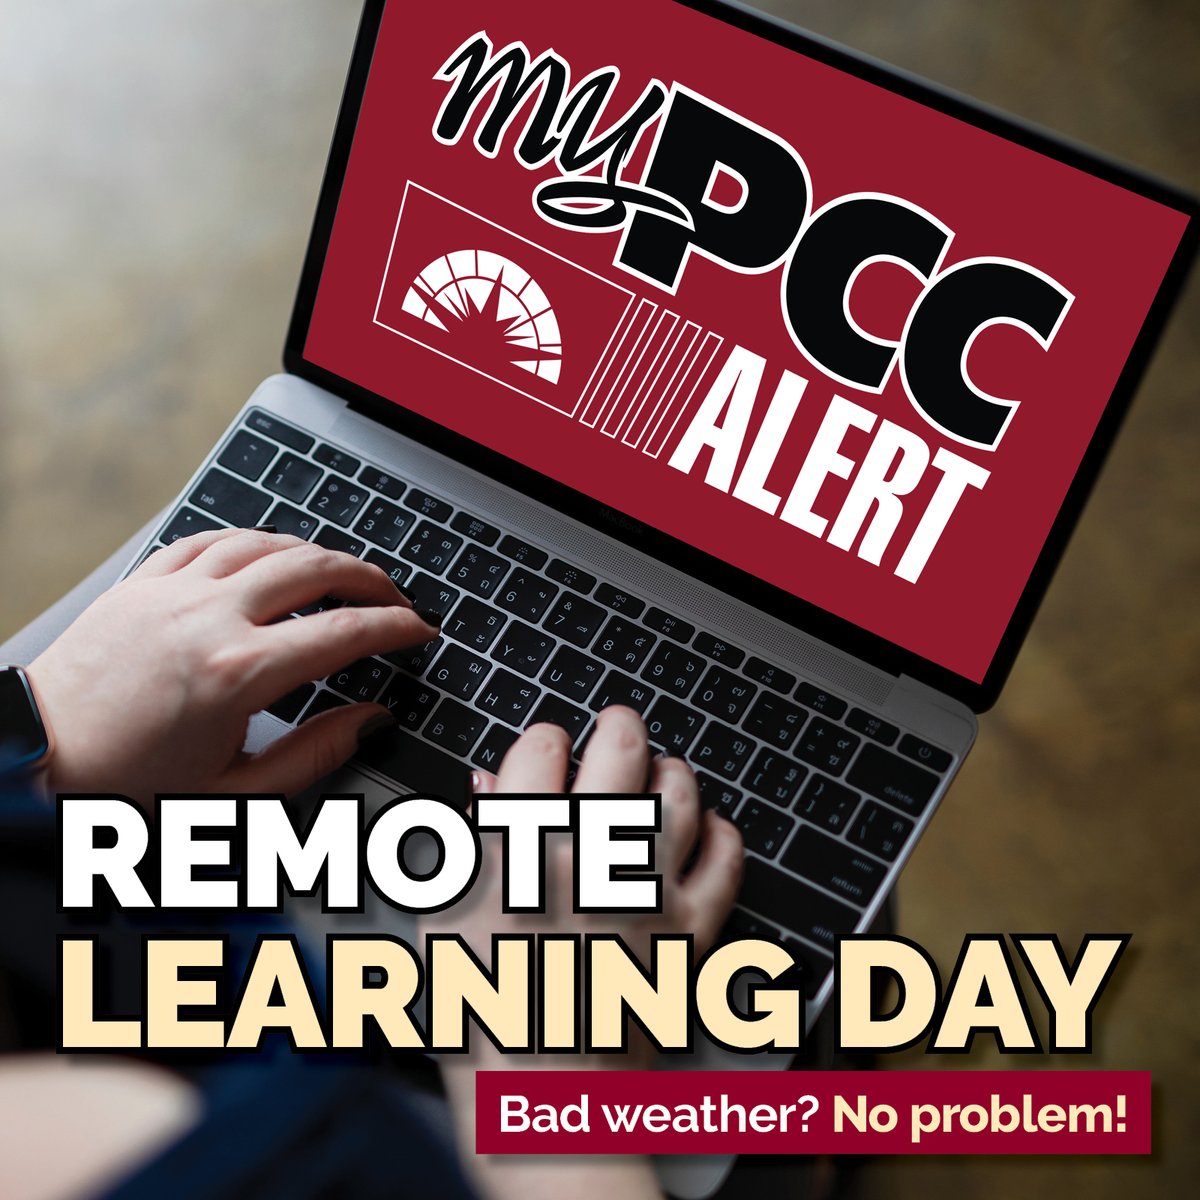 FOR FRIDAY, MARCH 15 - Due to weather, PCC Pueblo & Fremont campuses will be on remote status Friday, March 15. Students, check MyCourses for specific class instructions. All nonessential employees will work remotely. Info: pueblocc.edu/weather. #MyPCCAlert